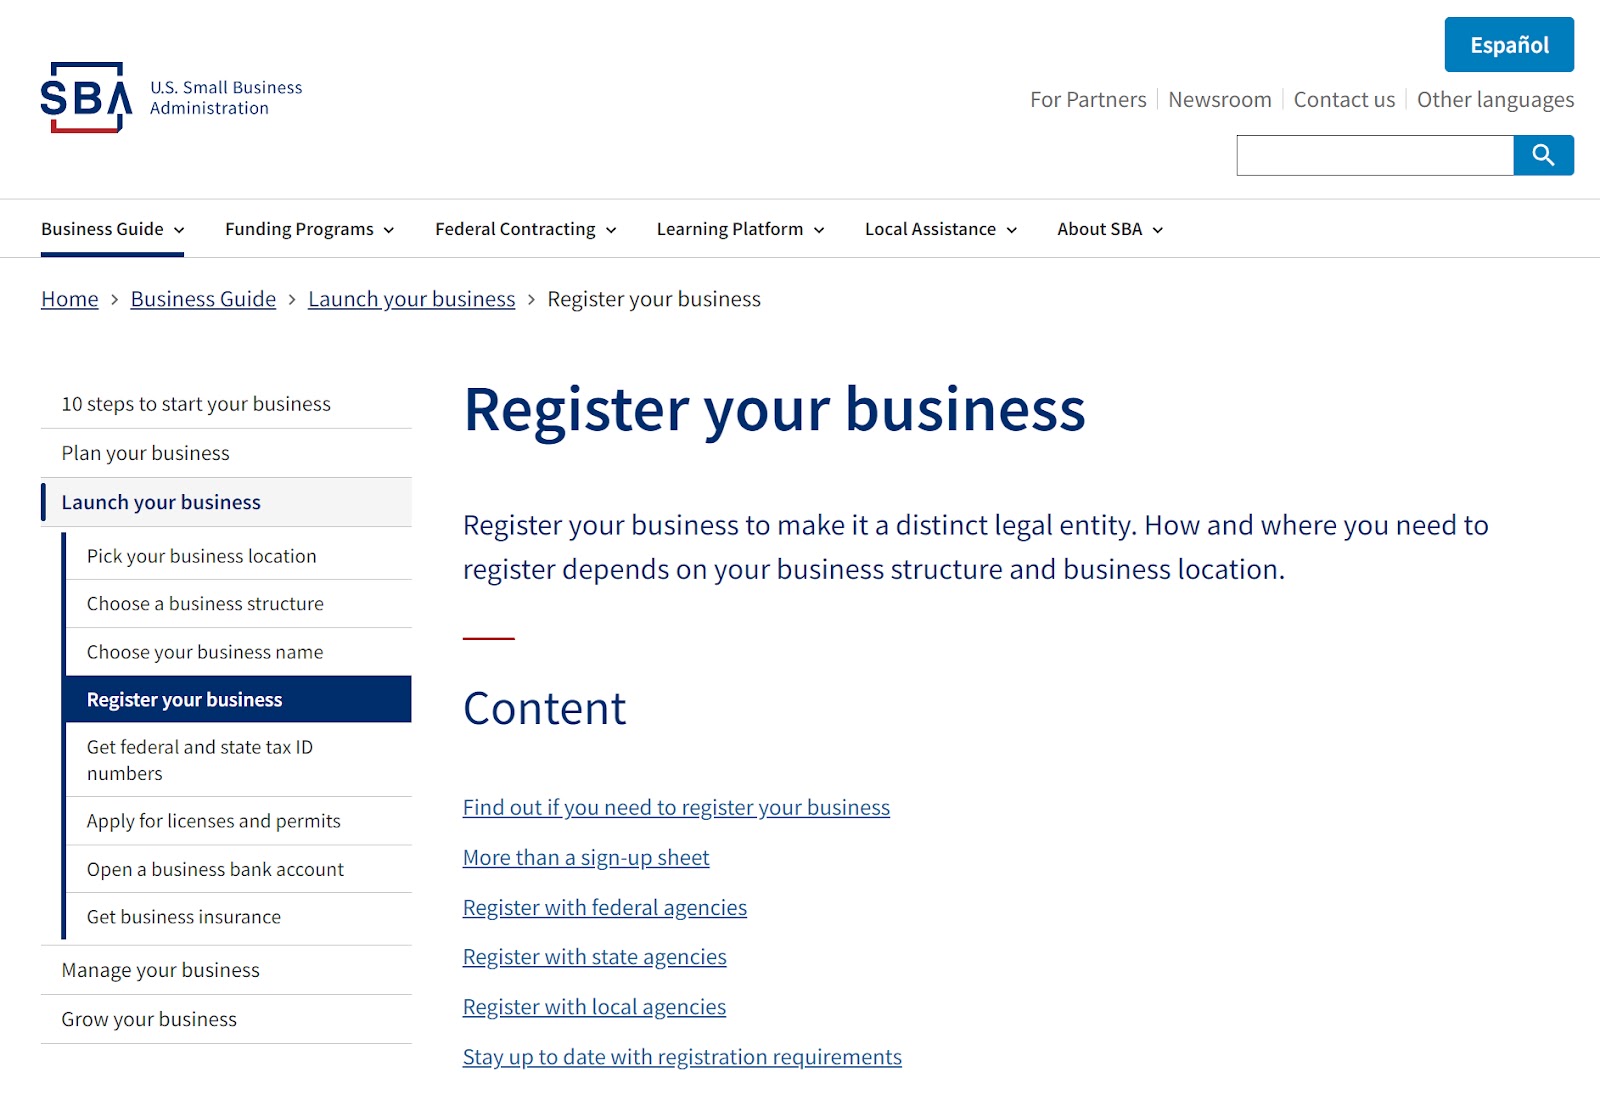 "Register your business" leafage   connected  U.S. Small Business Administration website